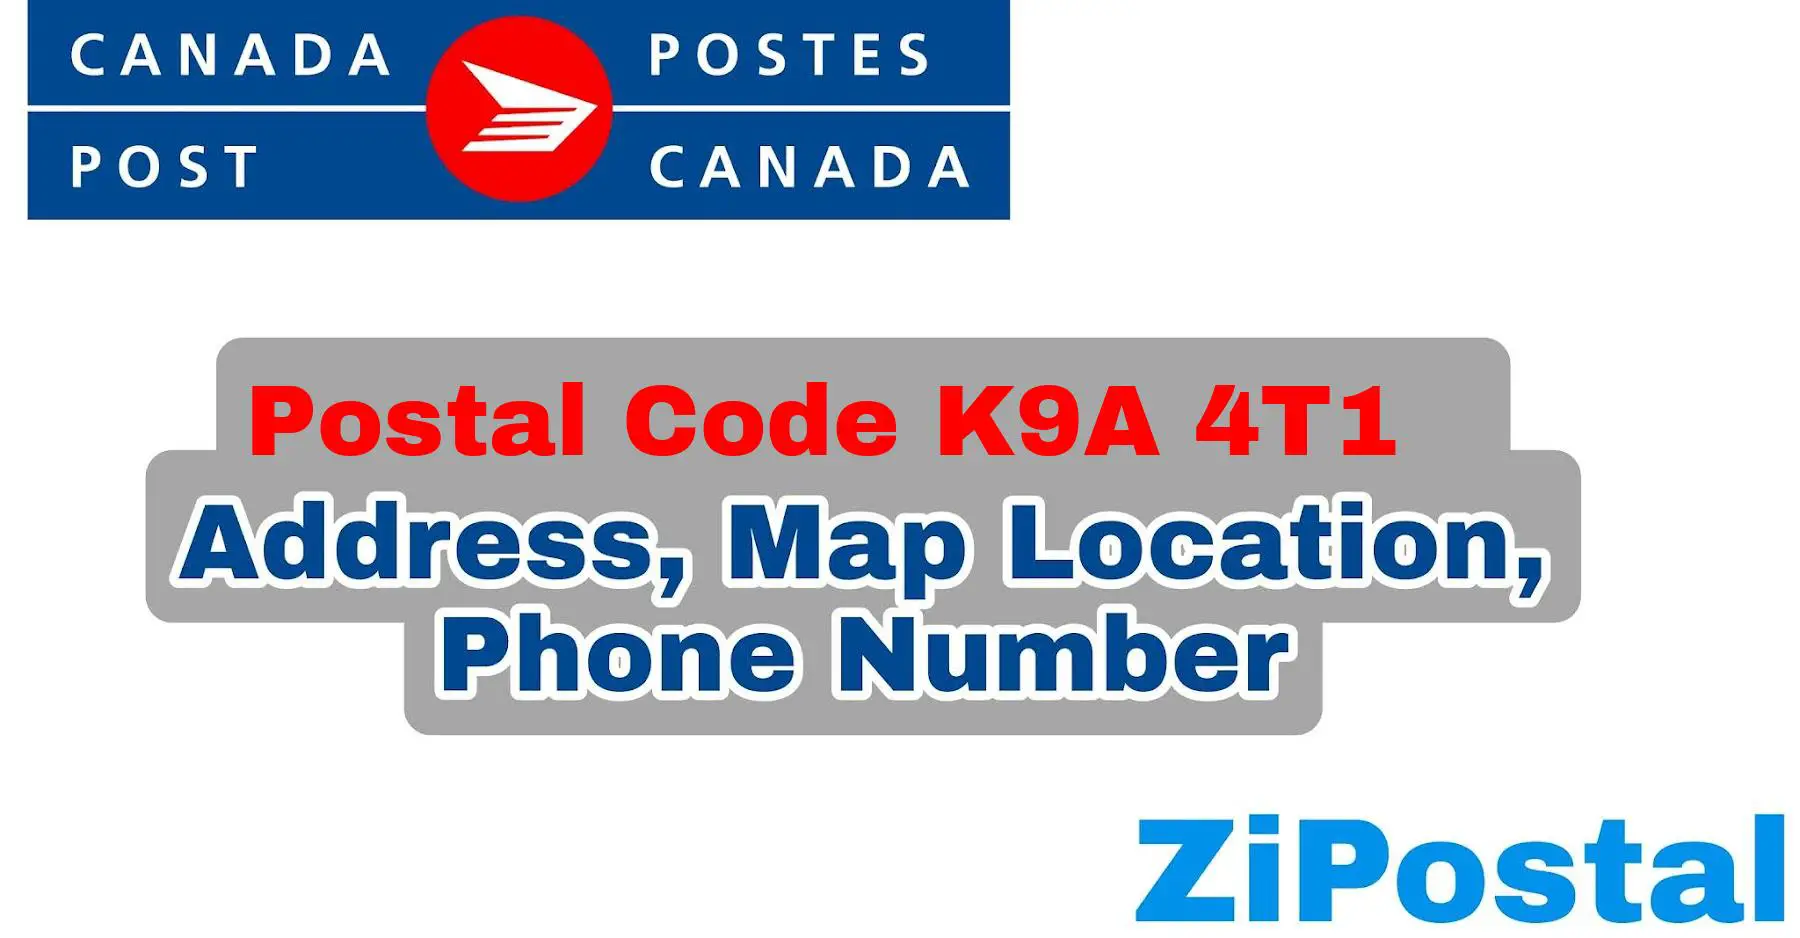 Postal Code K9A 4T1 Address Map Location and Phone Number